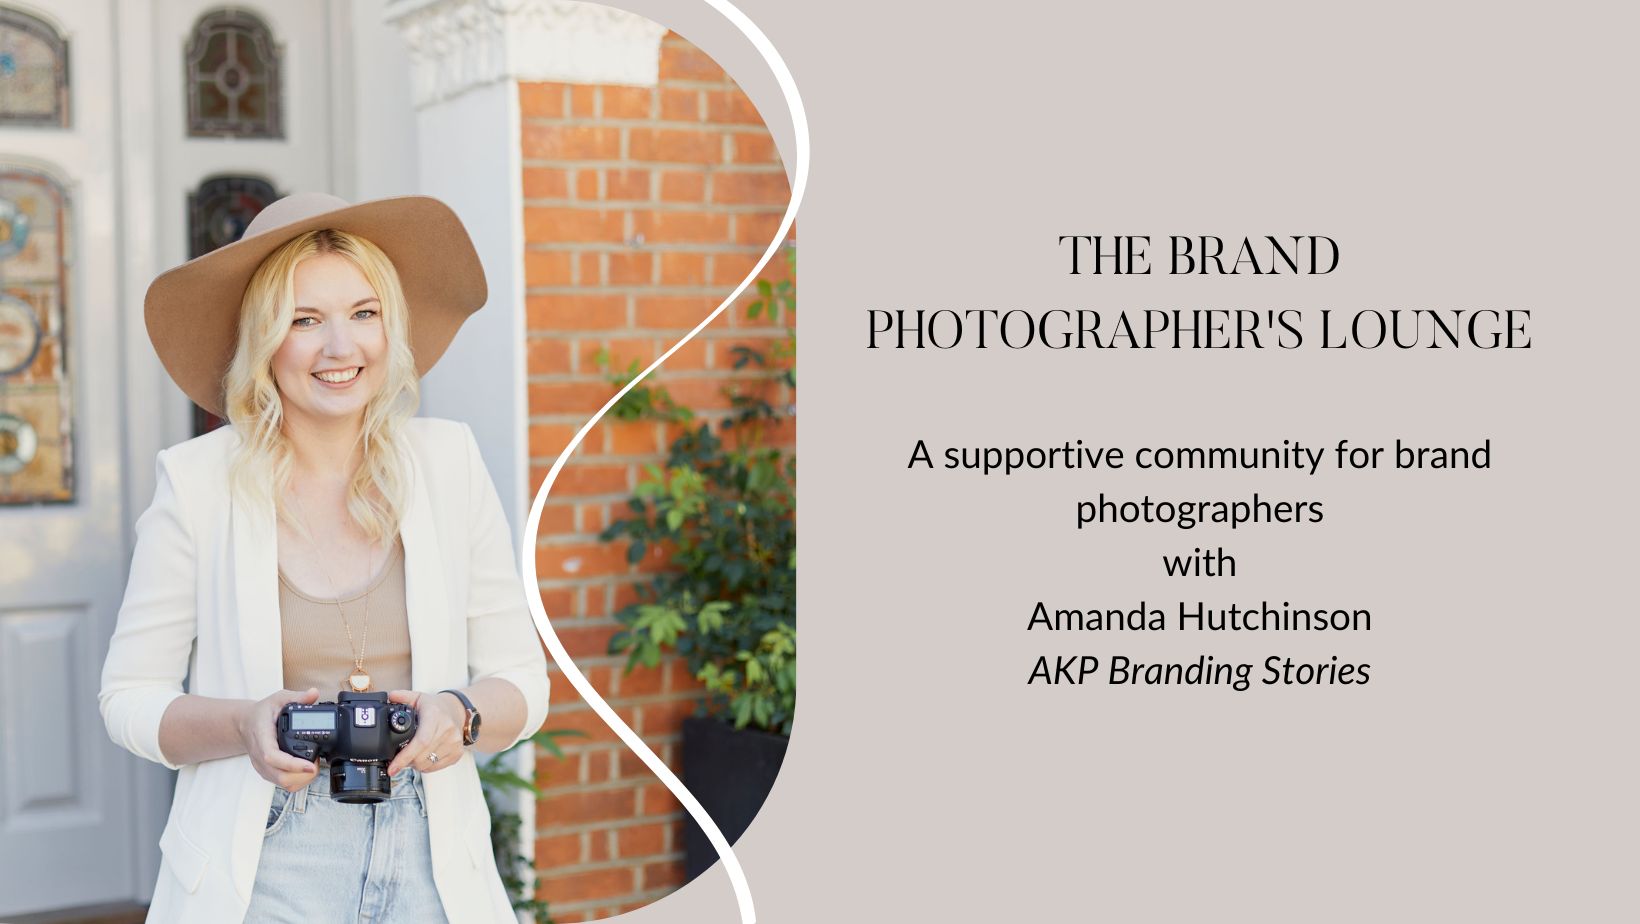 The facebook header image for the Brand Photographer's Lounge facebook group. on the left is an image of founder Amanda from AKP Branding Stories wearing a white blazer, beige top and hat and holding her camera, she's smiling at the camera. To the right are the words "The Brand Photographer's Lounge - A supportive community for brand photographers with Amanda Hutchinson AKP Branding Stories"